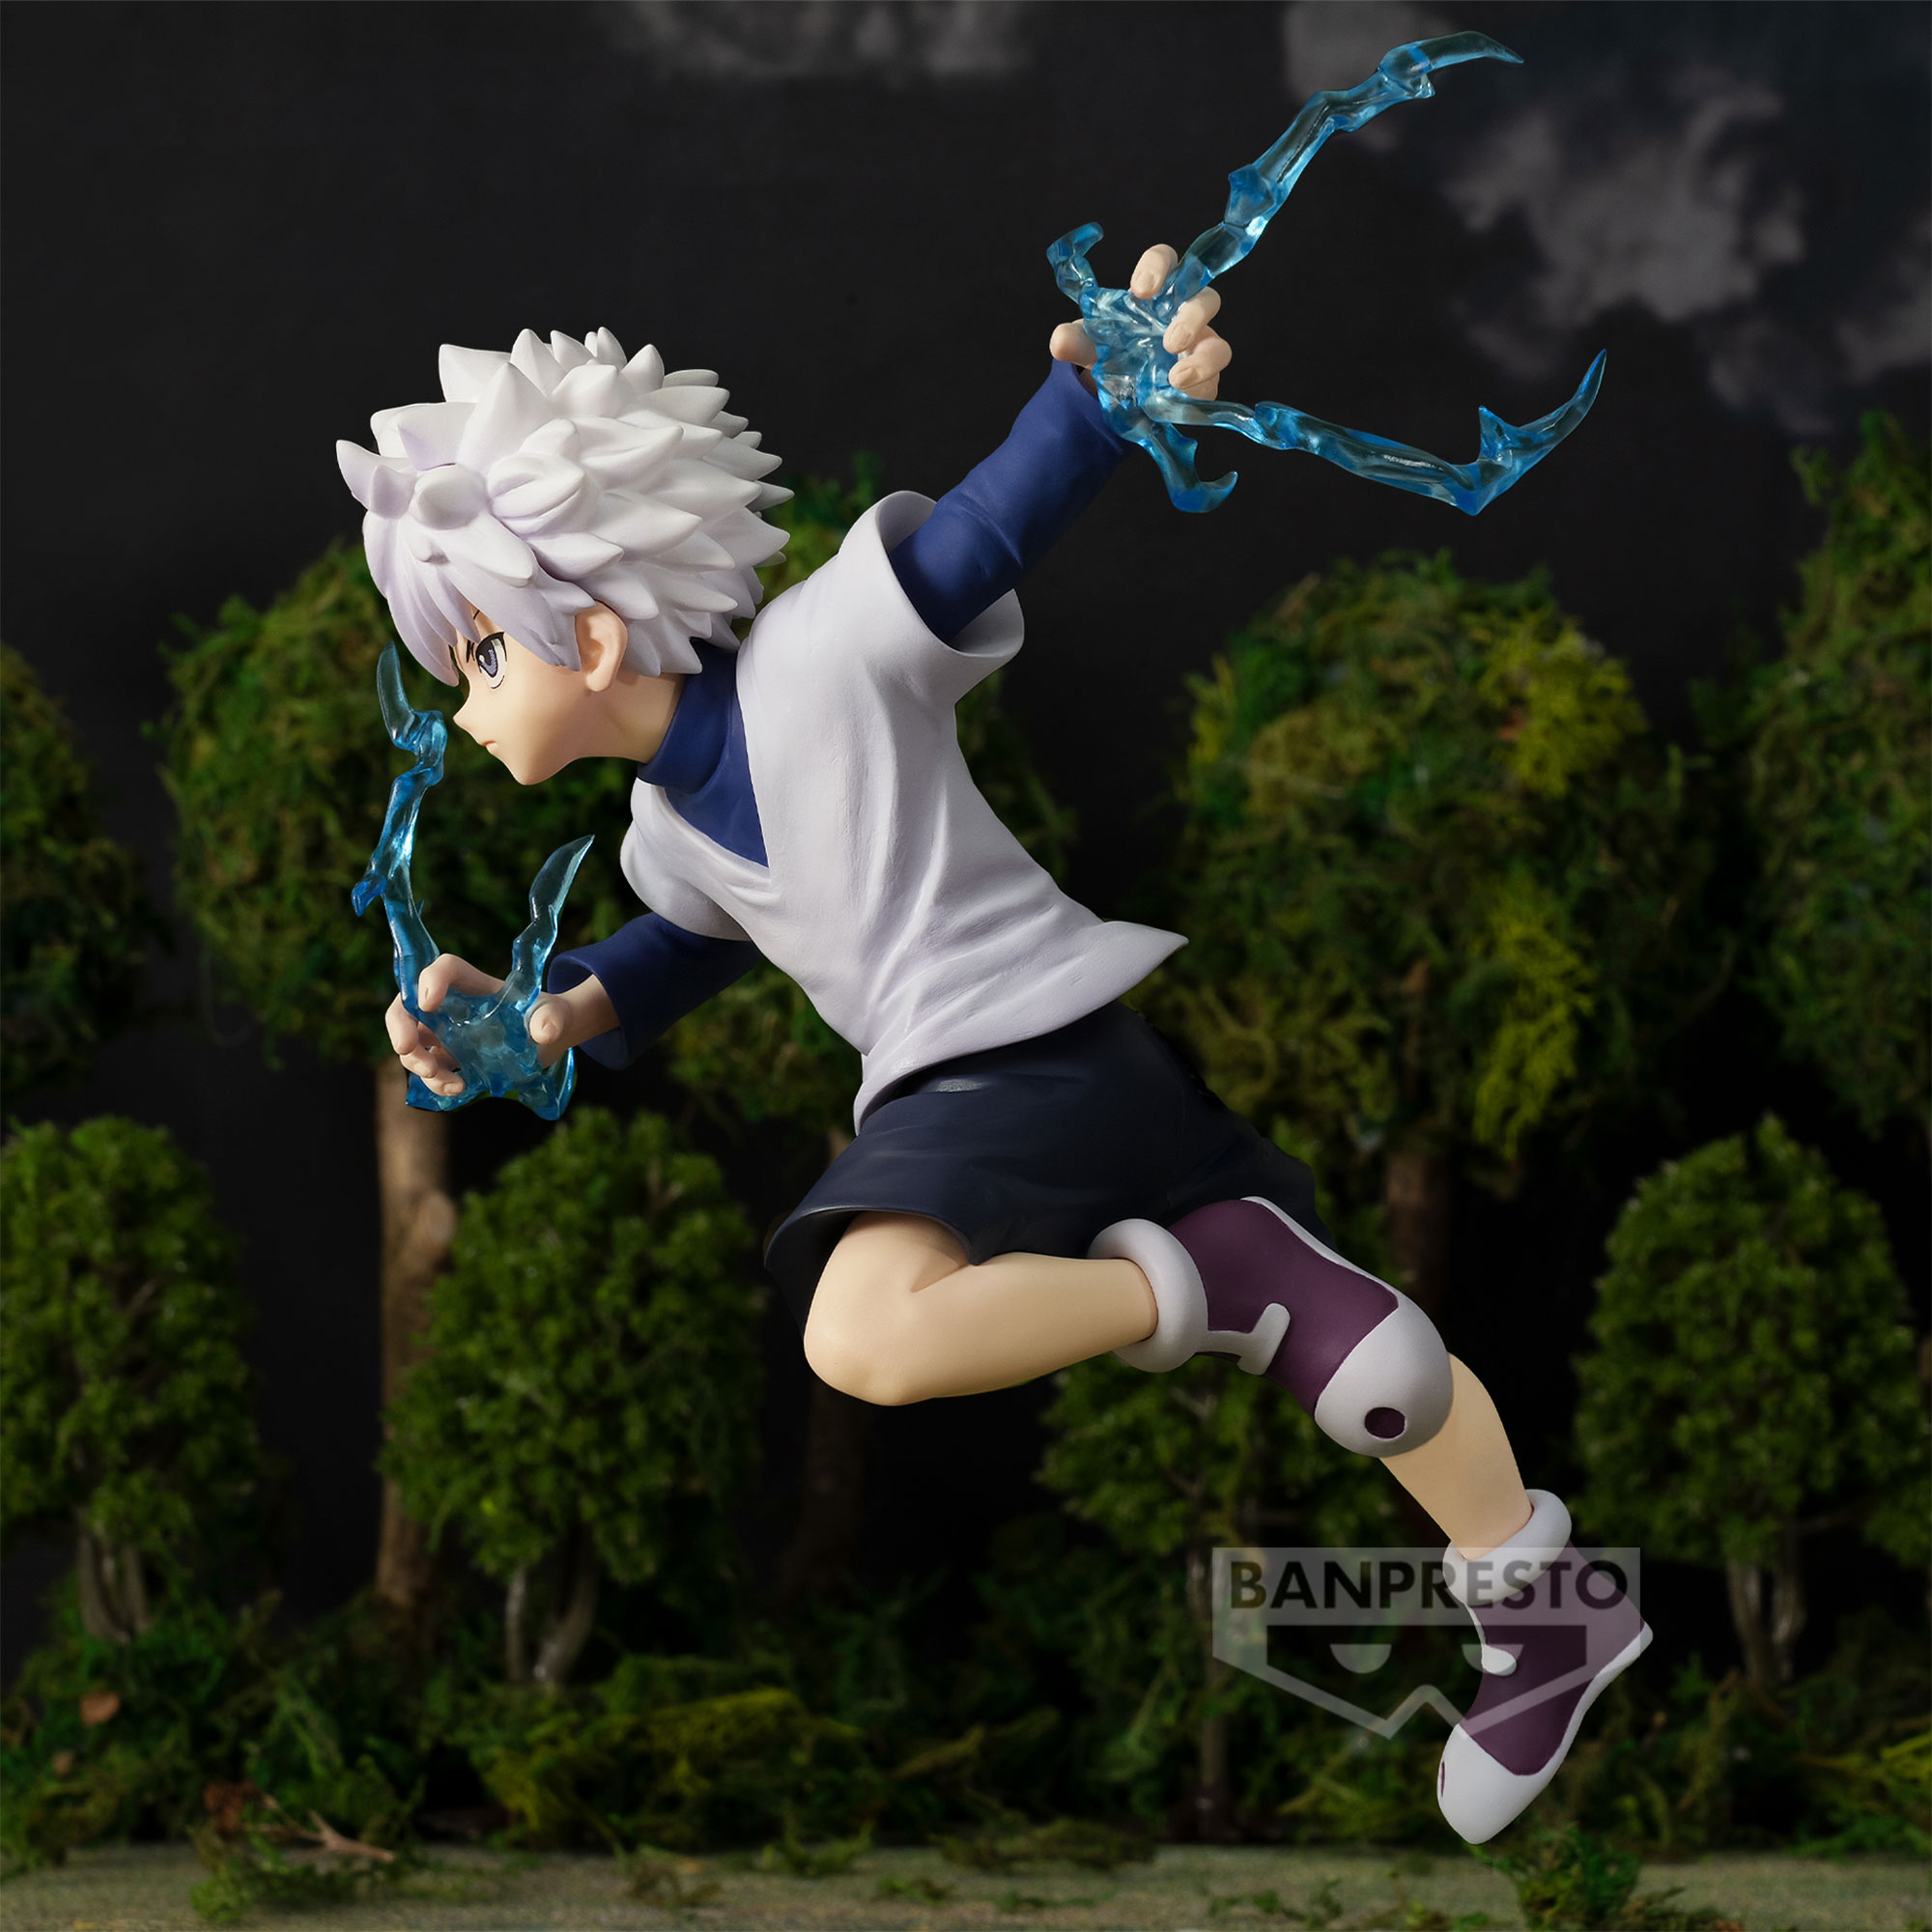 Between Good Smile and Banpresto, which did the better set of four for Hunter  X Hunter? : r/AnimeFigures